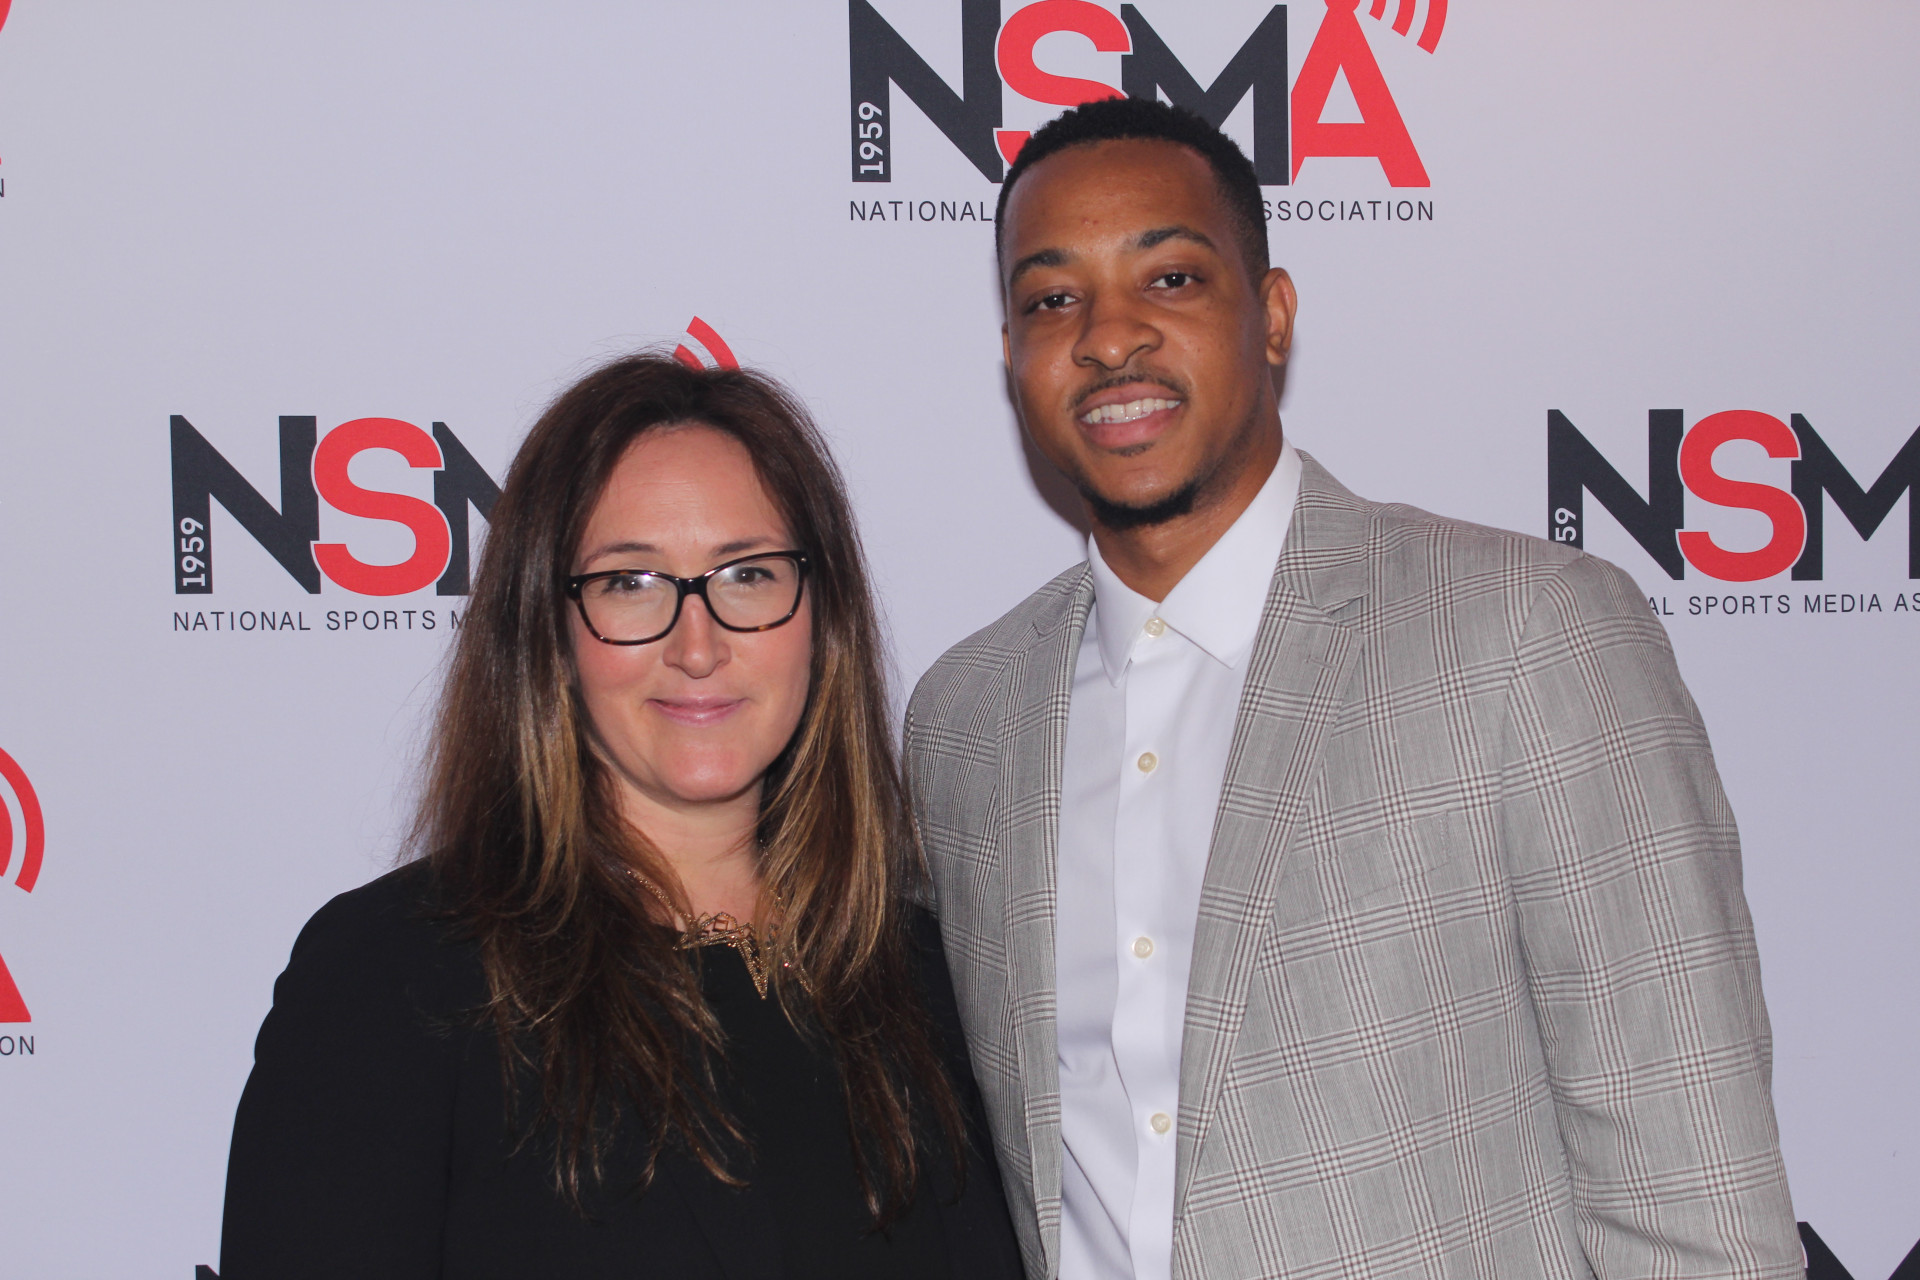 Jayme Messler - CEO, The Players' Tribune and C.J. McCollum, Contributing Editor